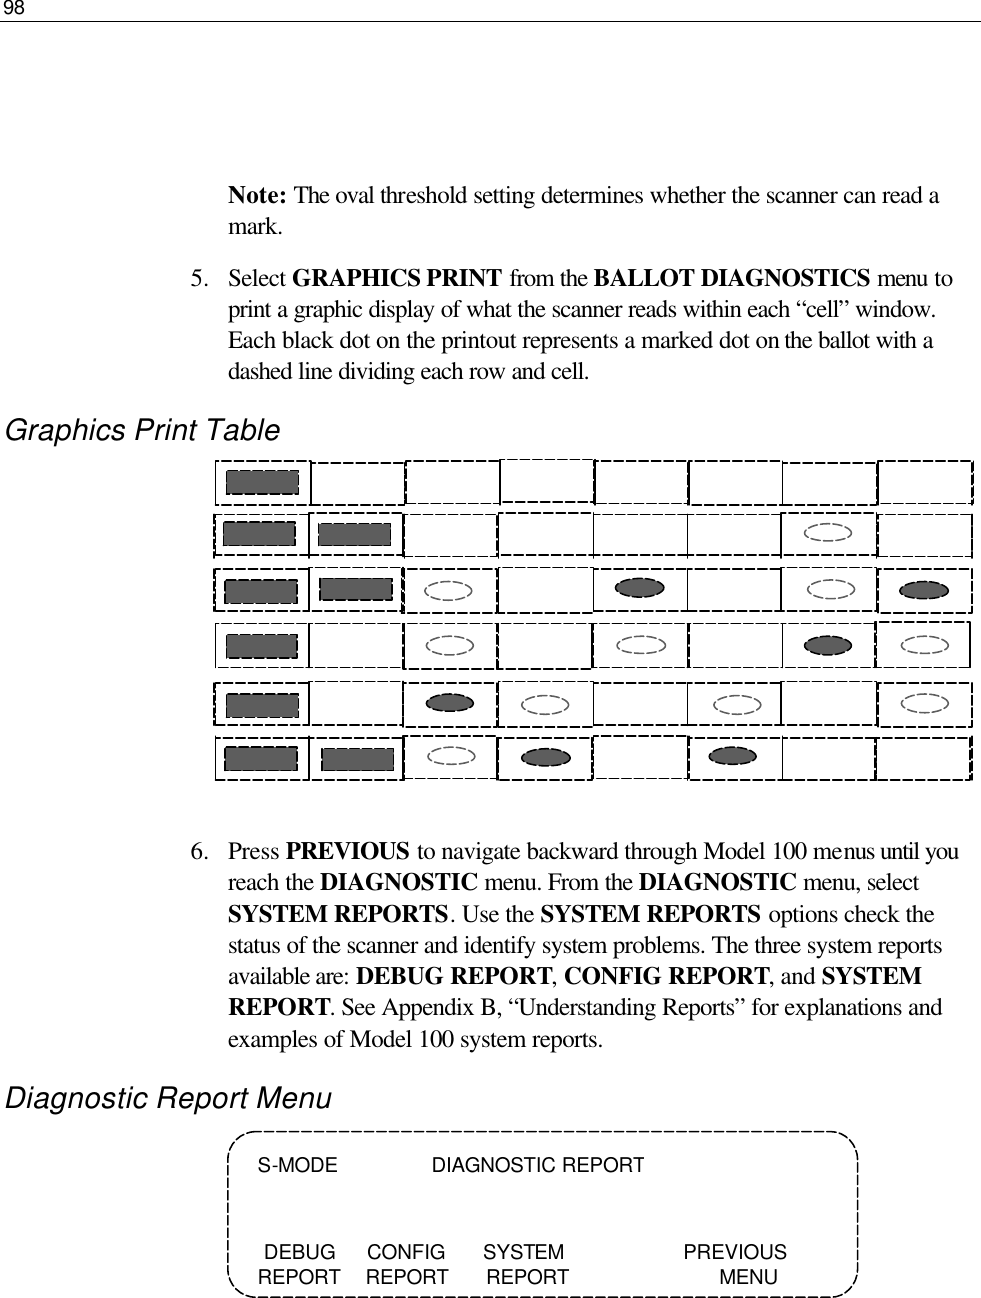 98     Note: The oval threshold setting determines whether the scanner can read a mark.  5.  Select GRAPHICS PRINT from the BALLOT DIAGNOSTICS menu to print a graphic display of what the scanner reads within each “cell” window. Each black dot on the printout represents a marked dot on the ballot with a dashed line dividing each row and cell.  Graphics Print Table                                                                                                                       6.  Press PREVIOUS to navigate backward through Model 100 menus until you reach the DIAGNOSTIC menu. From the DIAGNOSTIC menu, select SYSTEM REPORTS. Use the SYSTEM REPORTS options check the status of the scanner and identify system problems. The three system reports available are: DEBUG REPORT, CONFIG REPORT, and SYSTEM REPORT. See Appendix B, “Understanding Reports” for explanations and examples of Model 100 system reports. Diagnostic Report Menu     S-MODE               DIAGNOSTIC REPORT    DEBUG     CONFIG      SYSTEM                   PREVIOUS REPORT    REPORT      REPORT                        MENU 